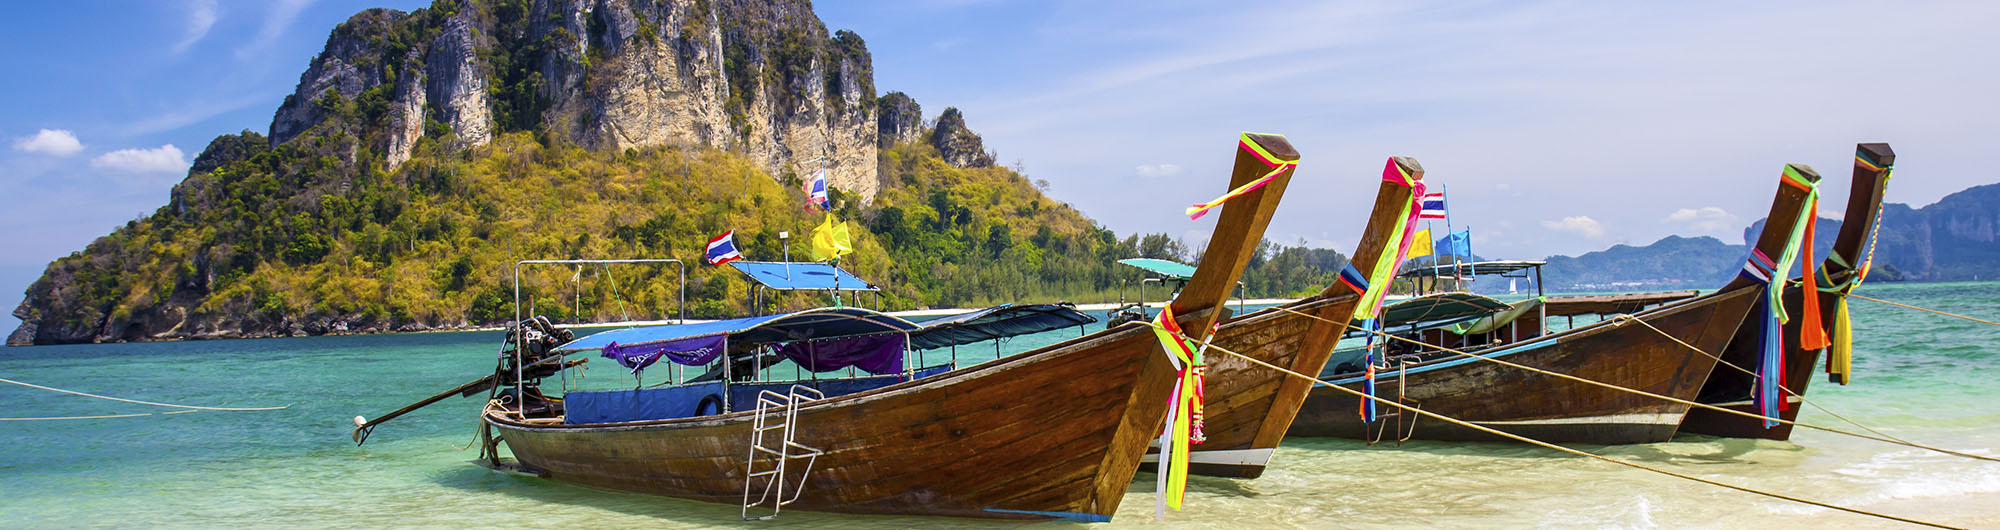 Search and compare cheap flights from Singapore to Krabi